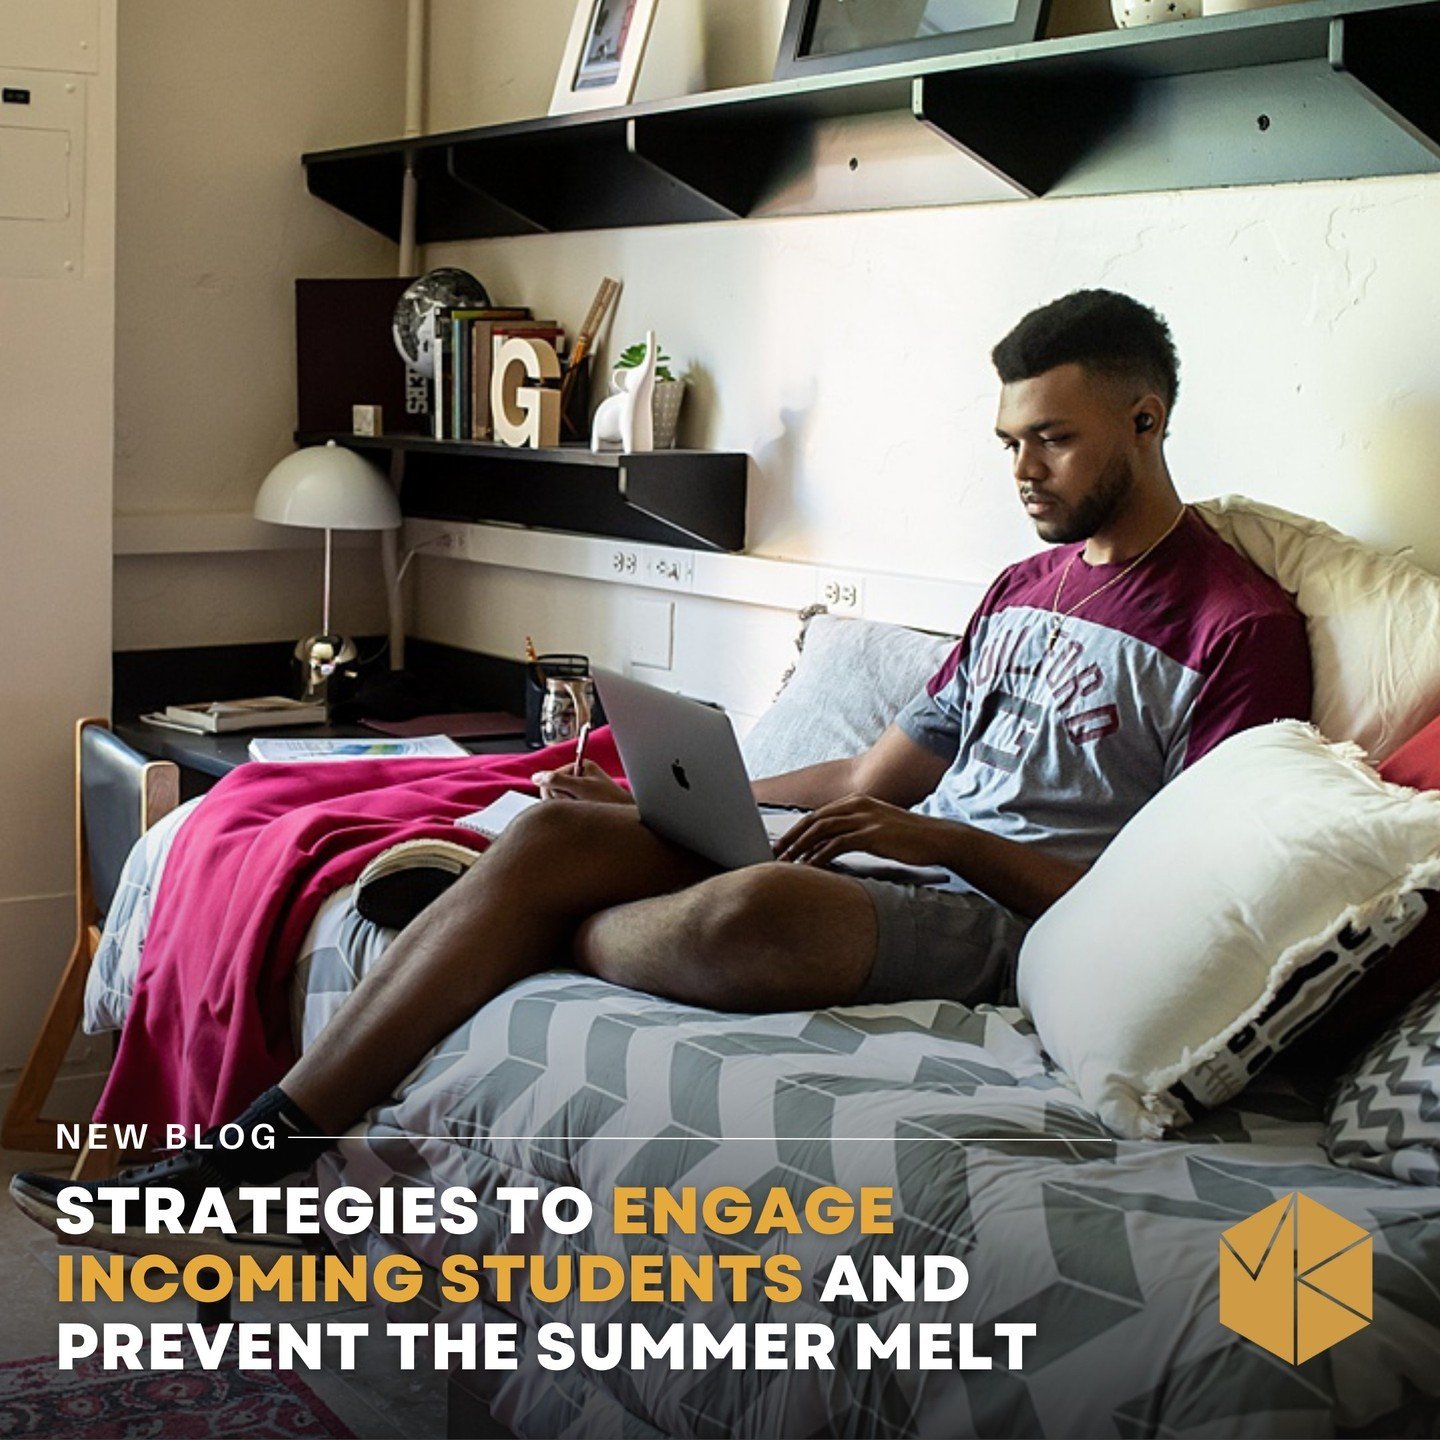 We know you've just barely made it through end of year events and graduation ceremonies, but we need to have a talk about #SummerMelt. 

☀️ According to a study from Harvard University, the rates of summer melt range from 10 to 40% of college-intendi